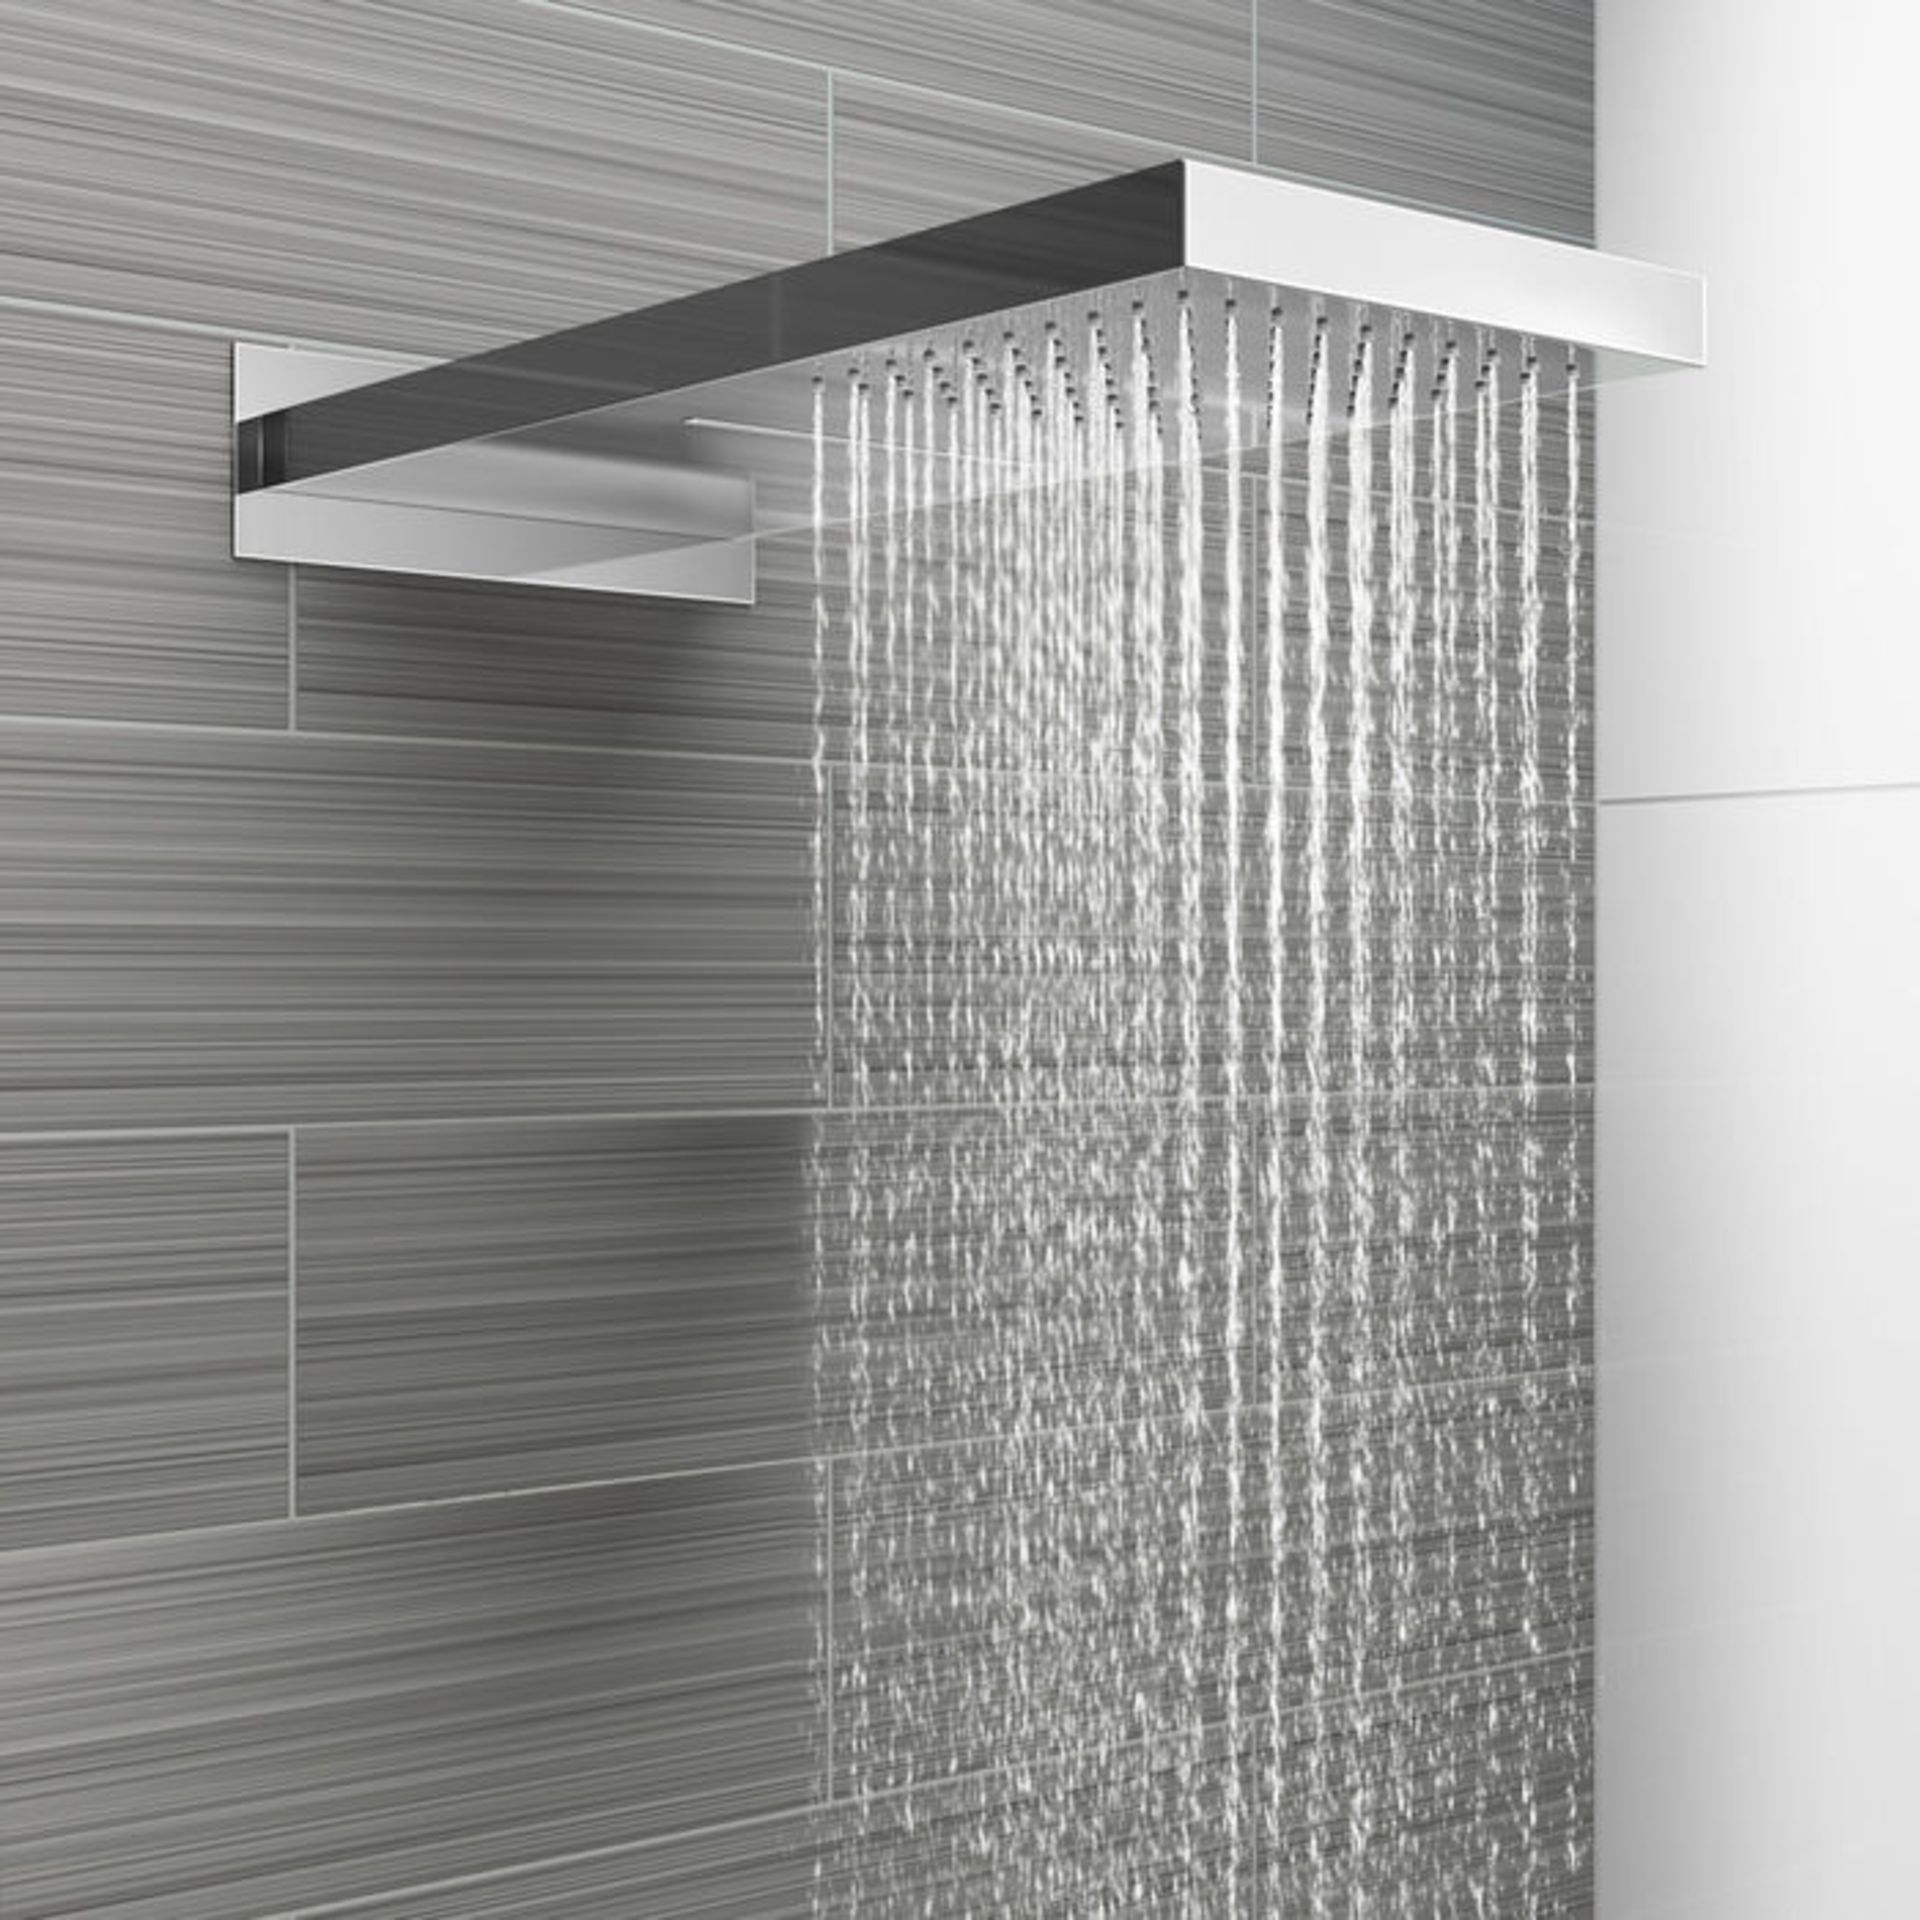 (S92) Stainless Steel 230x500mm Waterfall Shower Head. RRP £374.99 Dual function waterfall and - Bild 3 aus 6